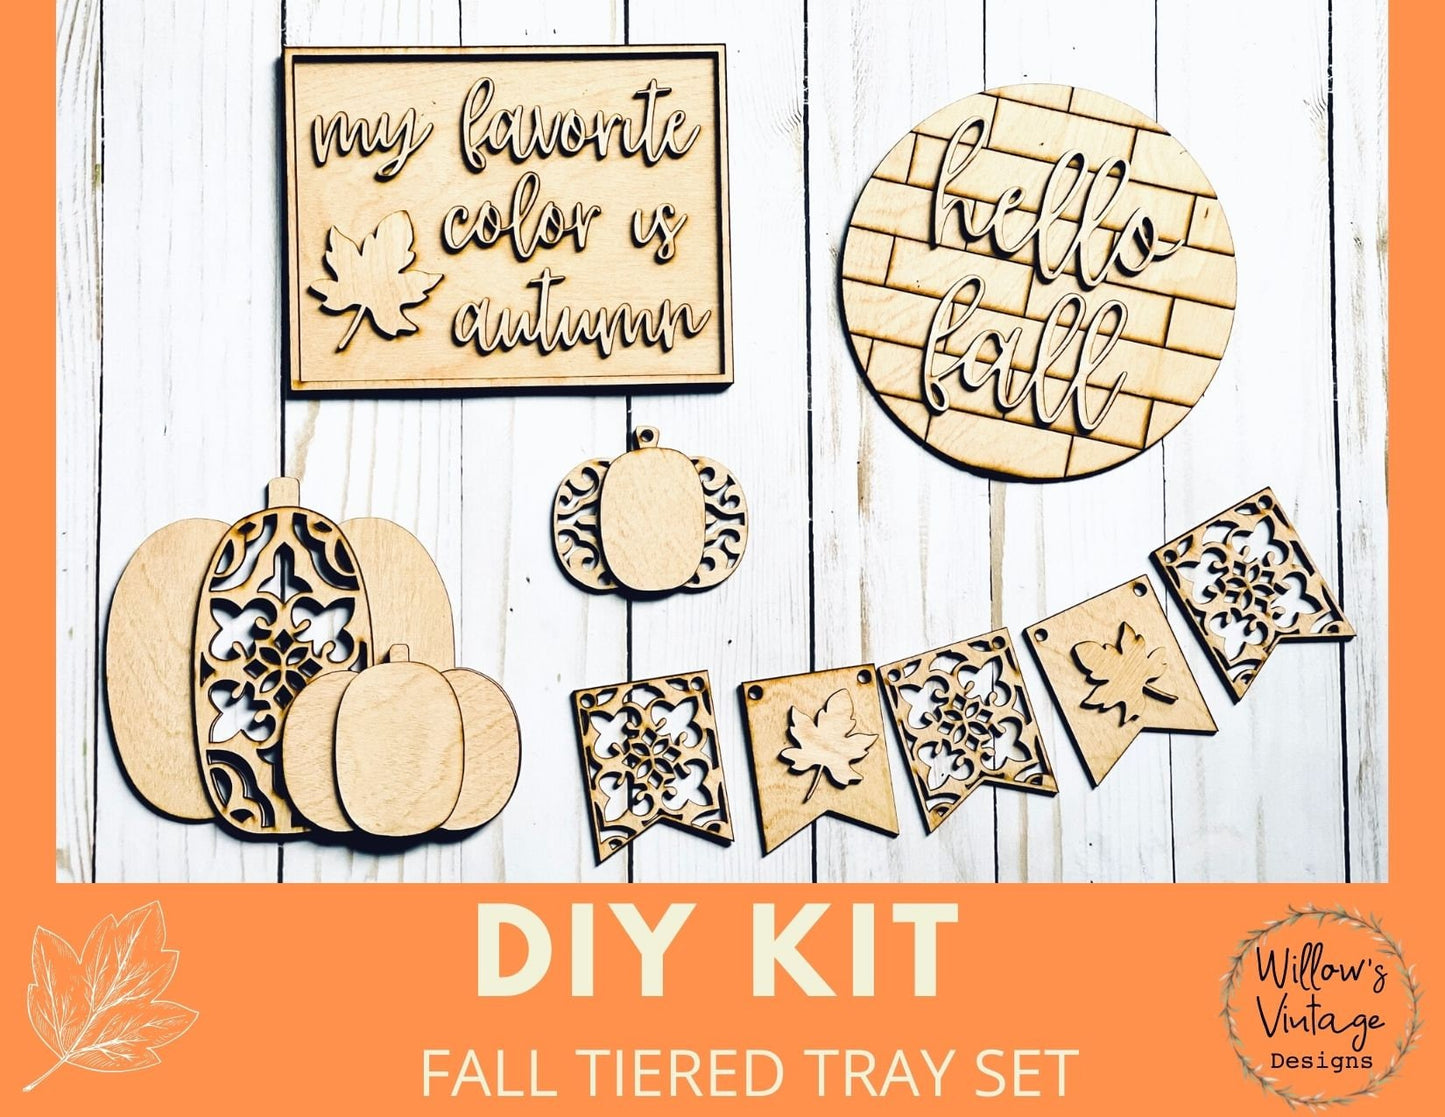 Fall Tiered Tray DIY Kit - Decorative Tray DIY - Fall Decor - Unfinished Wood Blanks